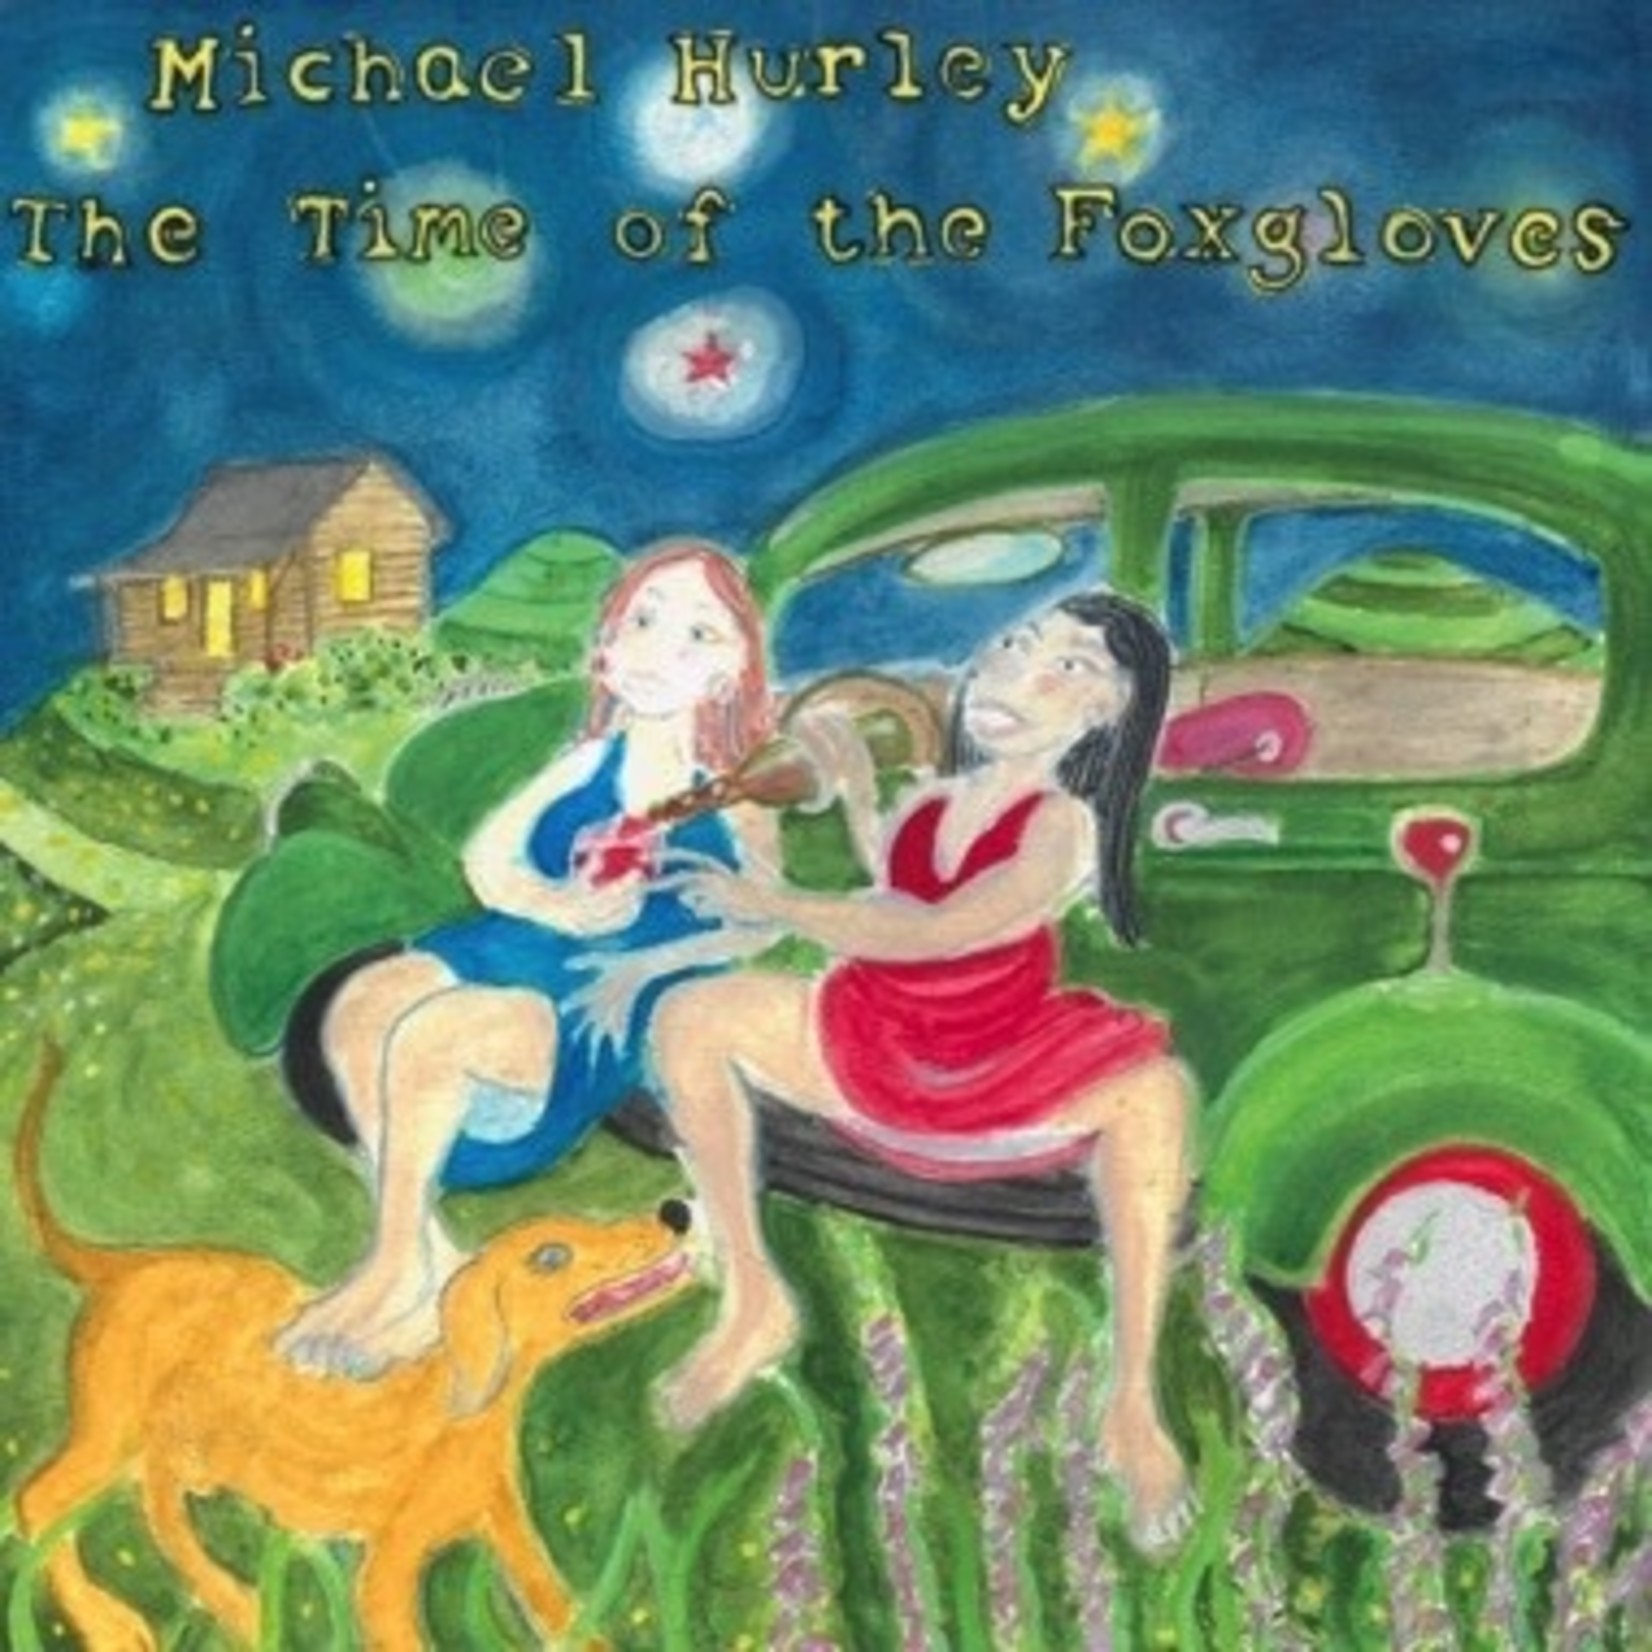 No Quarter Michael Hurley - The Time of the Foxgloves (LP)